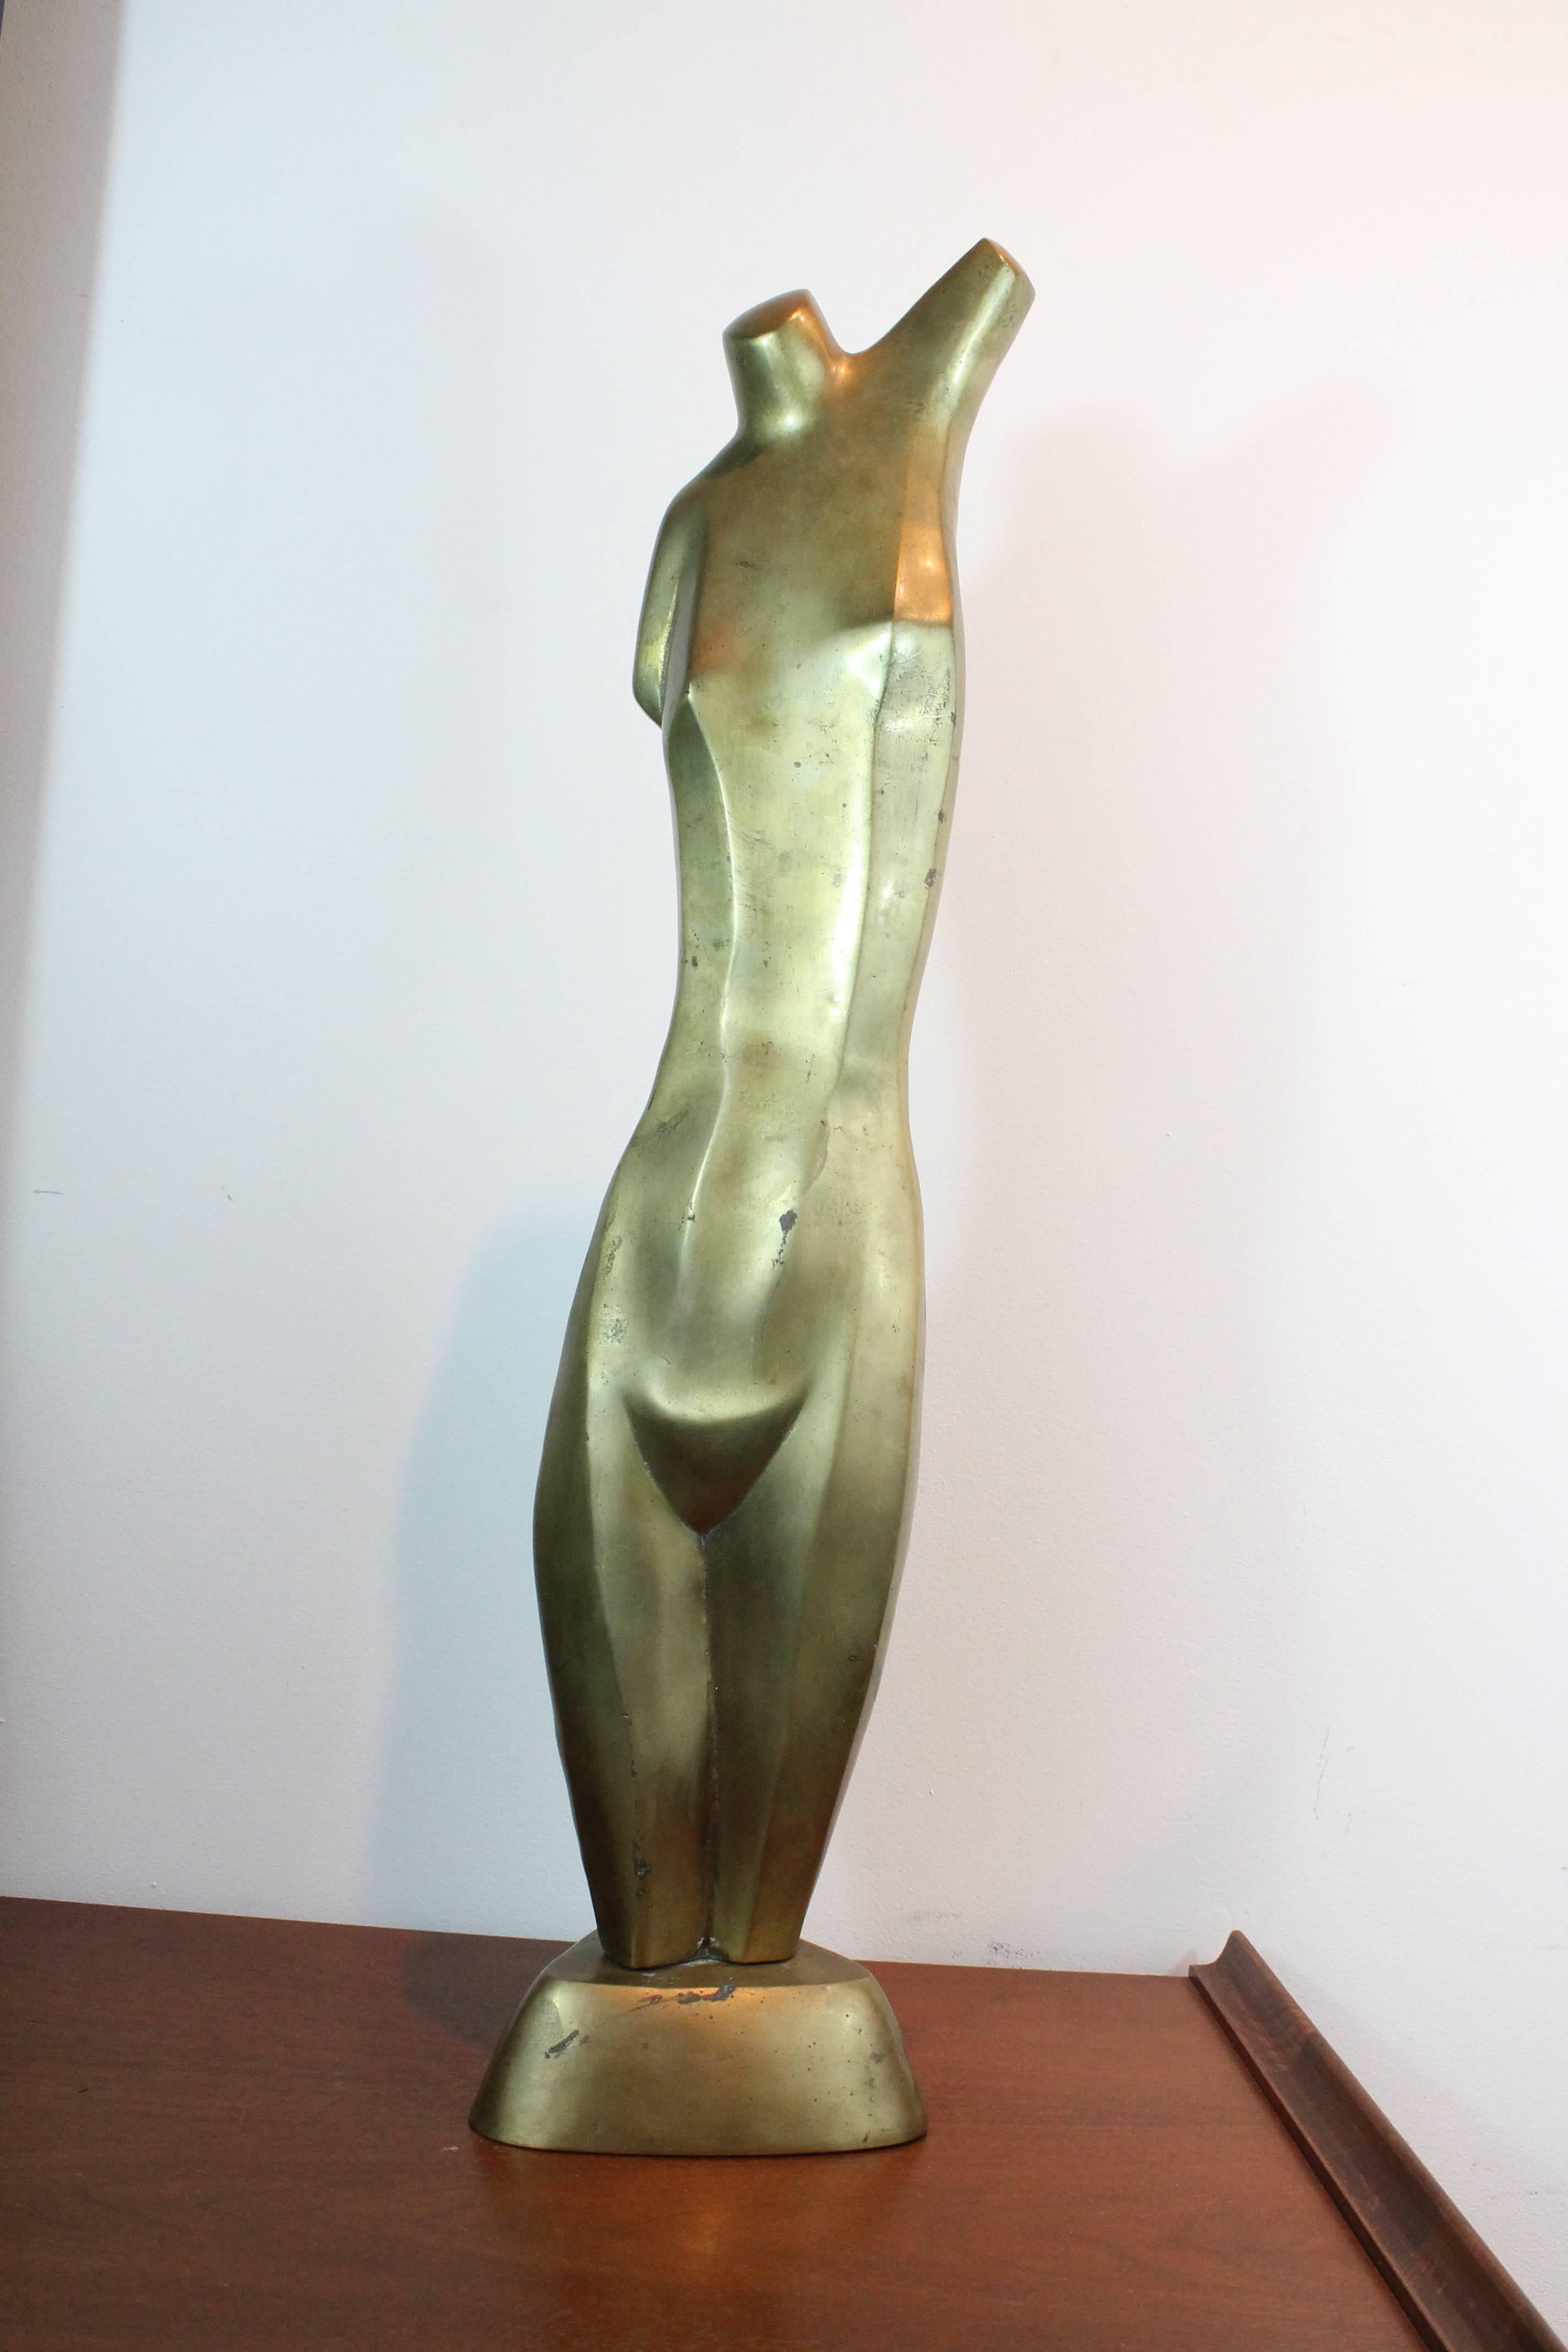 Wonderful and graceful large-scale modernist elongated female nude sculpture in brass on a triangular plinth.